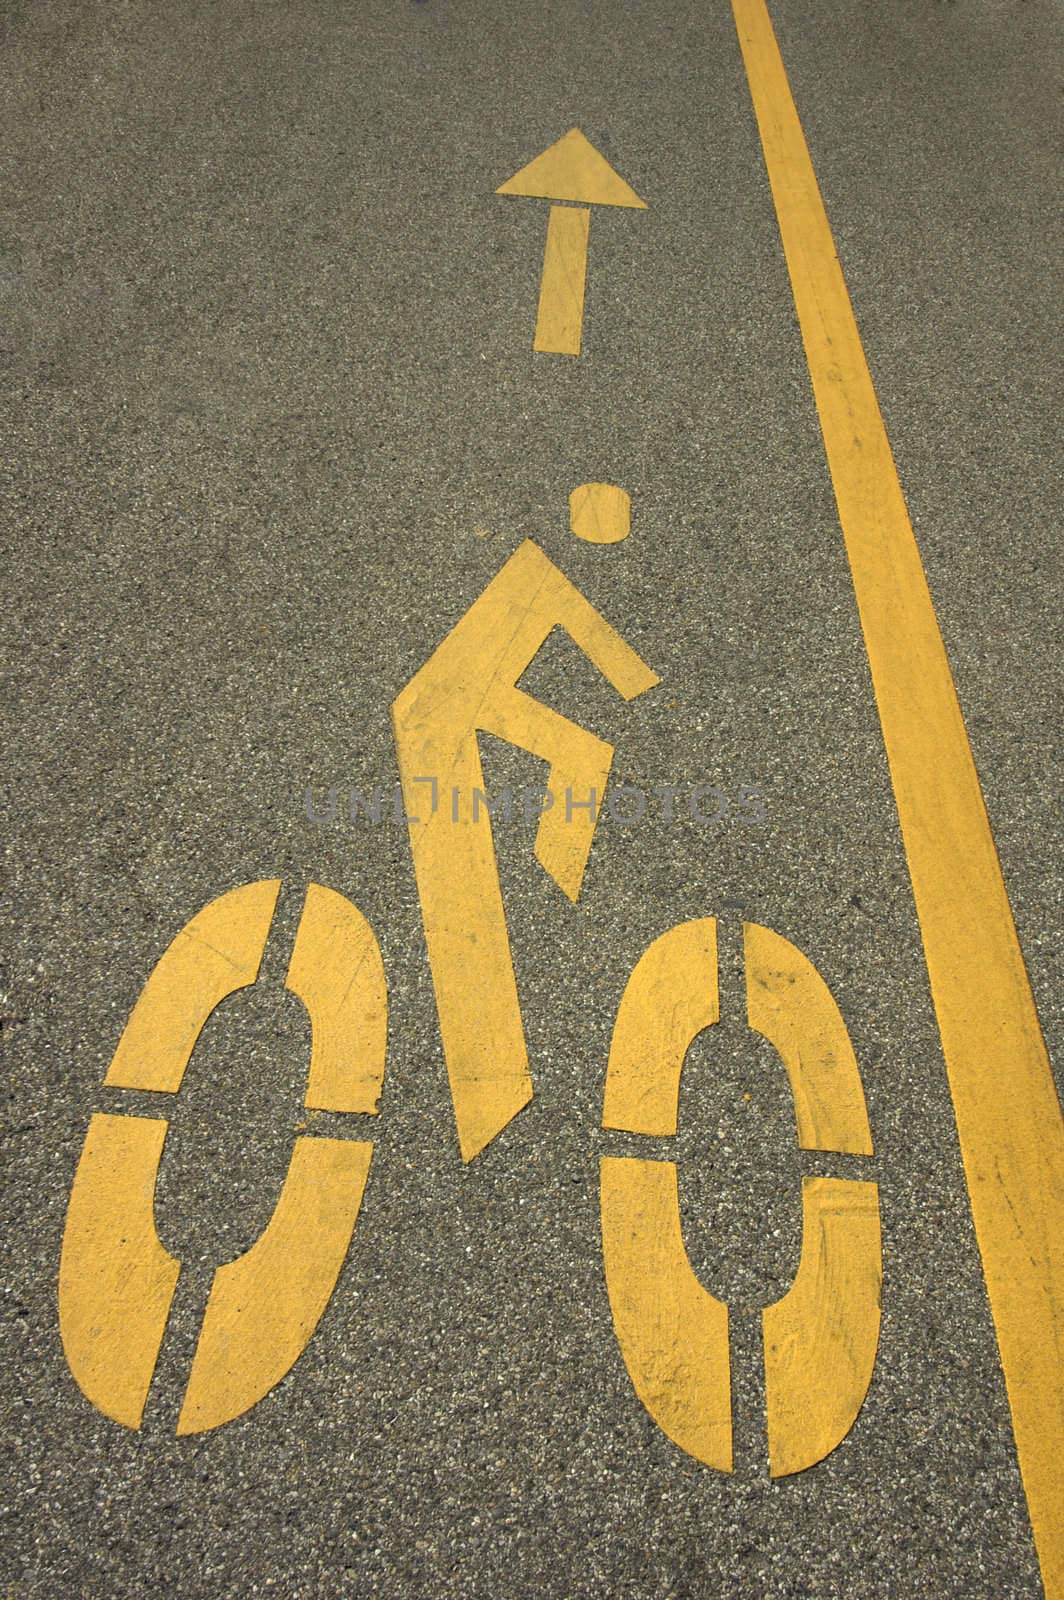 A cycle-track sign with arrow. Space for text on the tarmac to the left of the arrow.